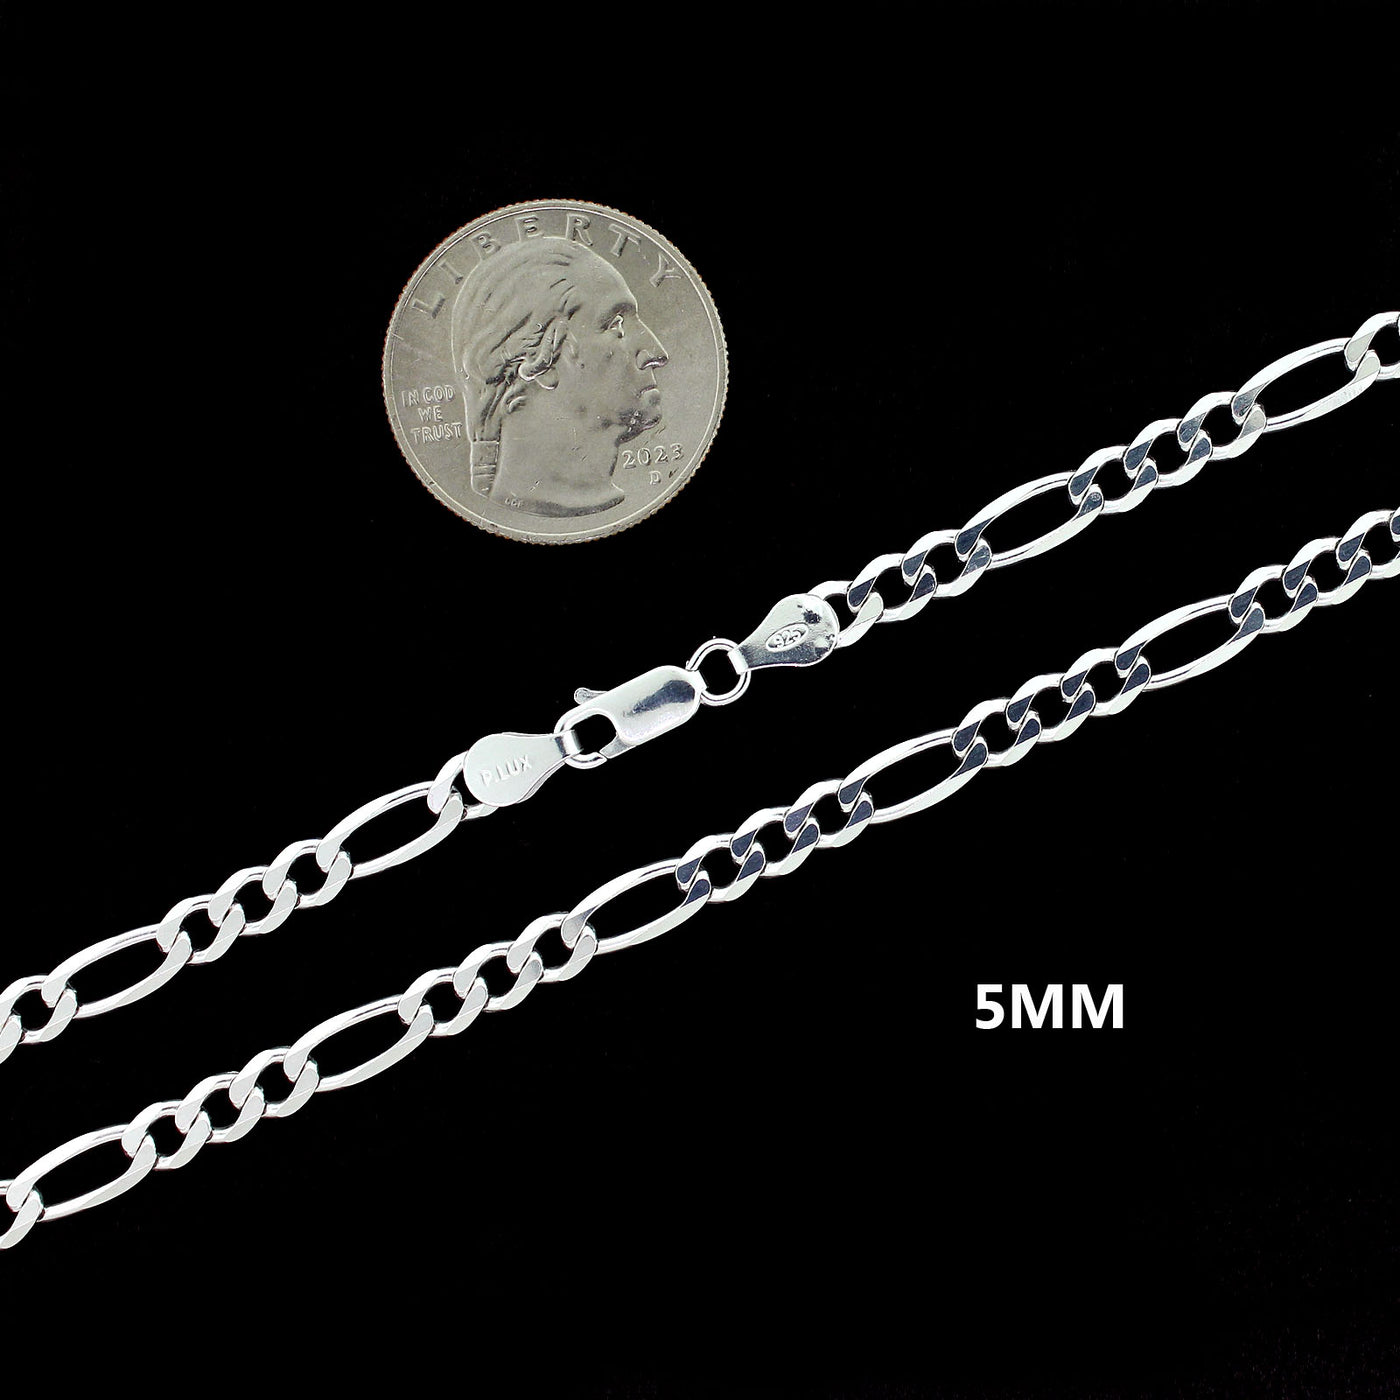 Real 5MM Solid 925 Sterling Silver Italian FIGARO LINK CHAIN Necklace UNISEX